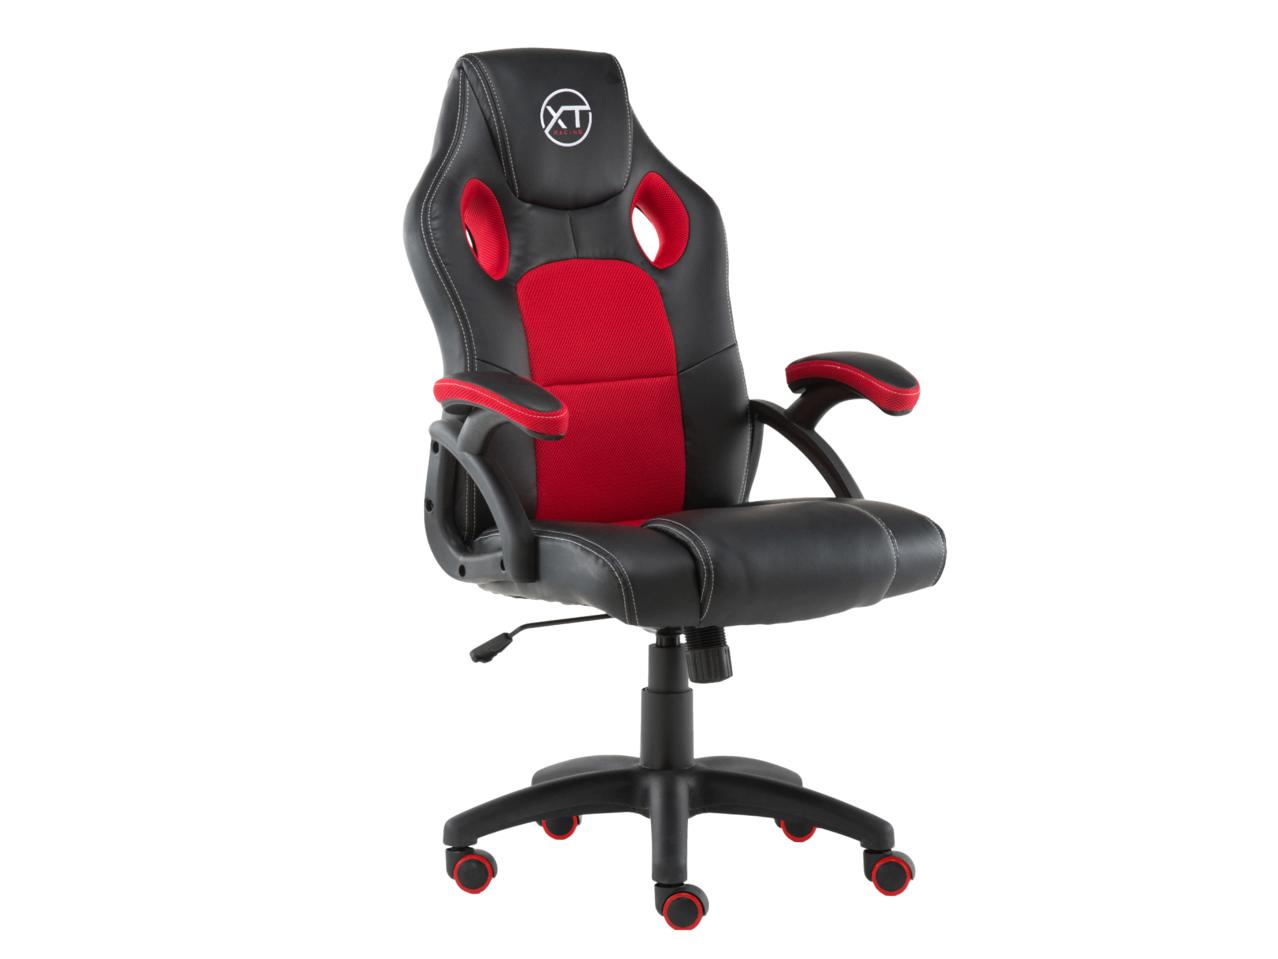 XTRACING S1 Gaming Chair